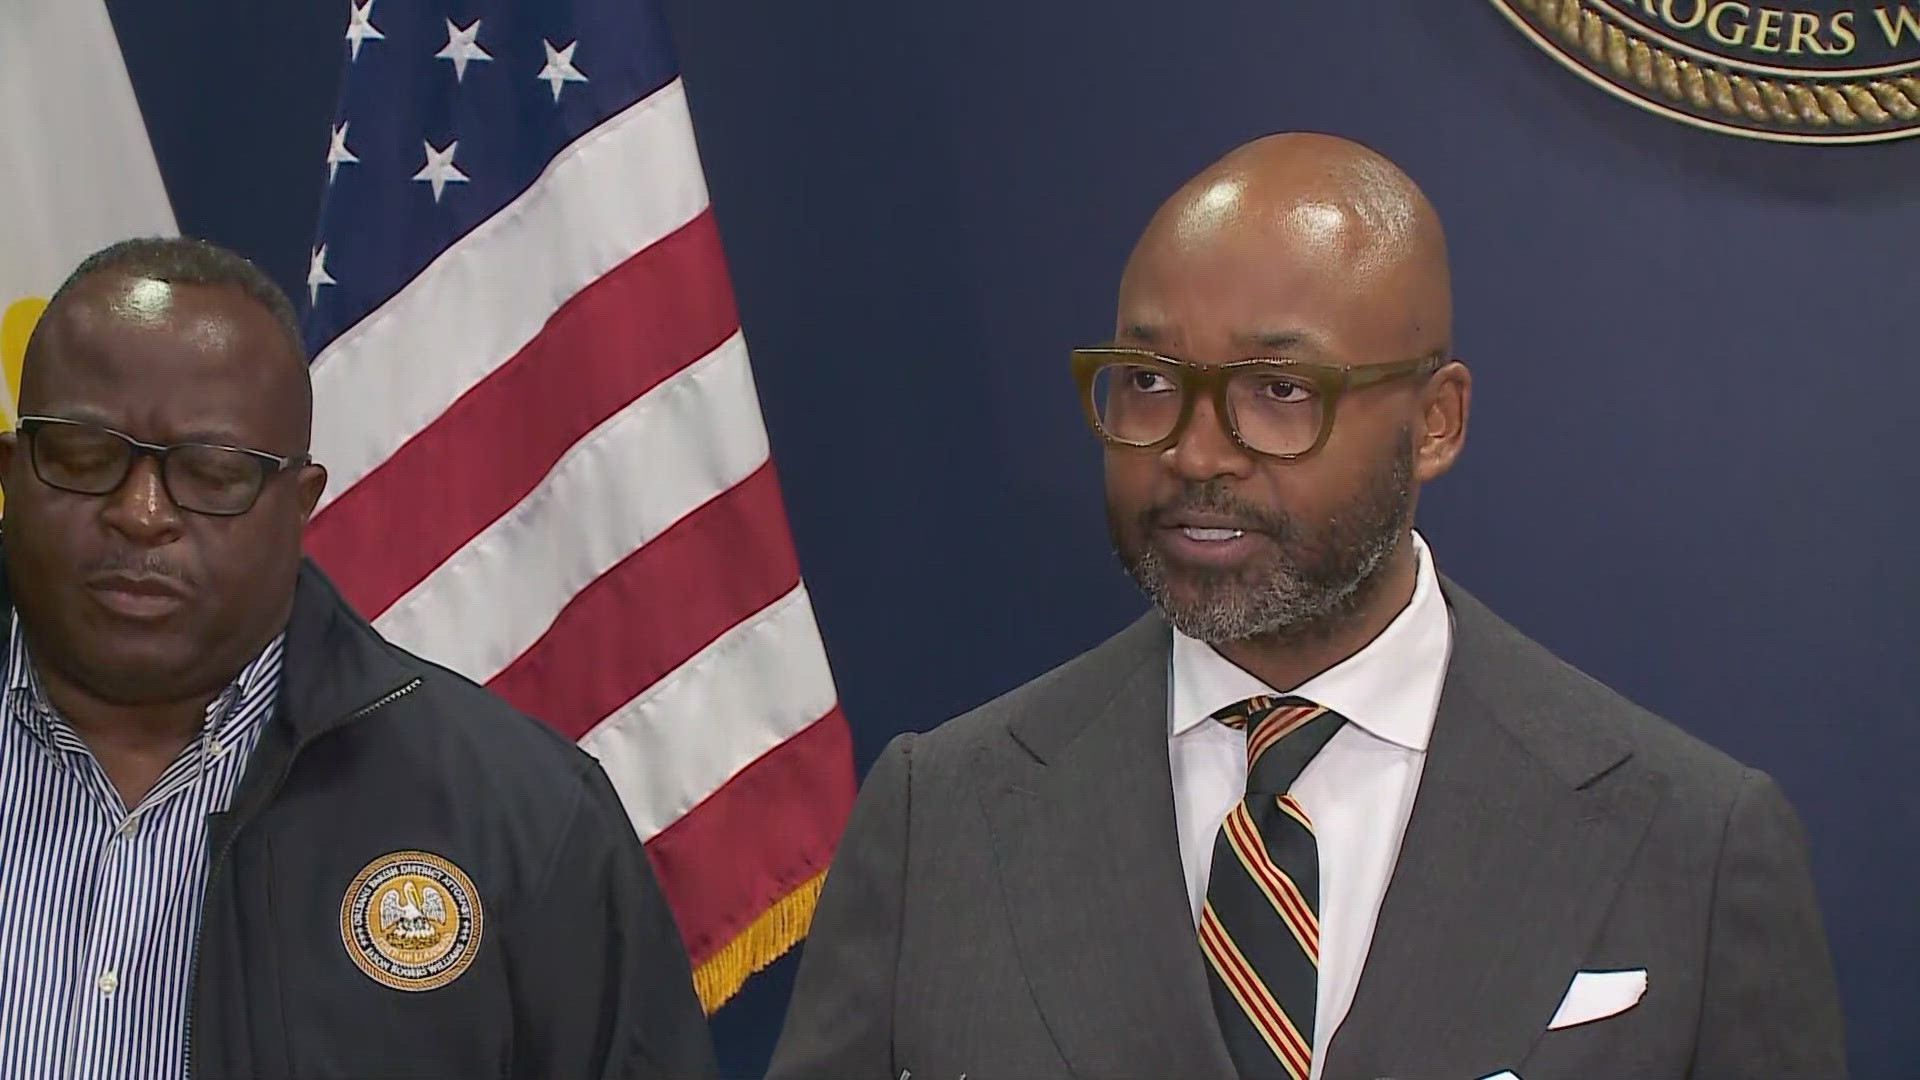 The Orleans Parish District Attorney’s Office hosts a press conference to address a scam related to jury summonses targeting New Orleans residents.